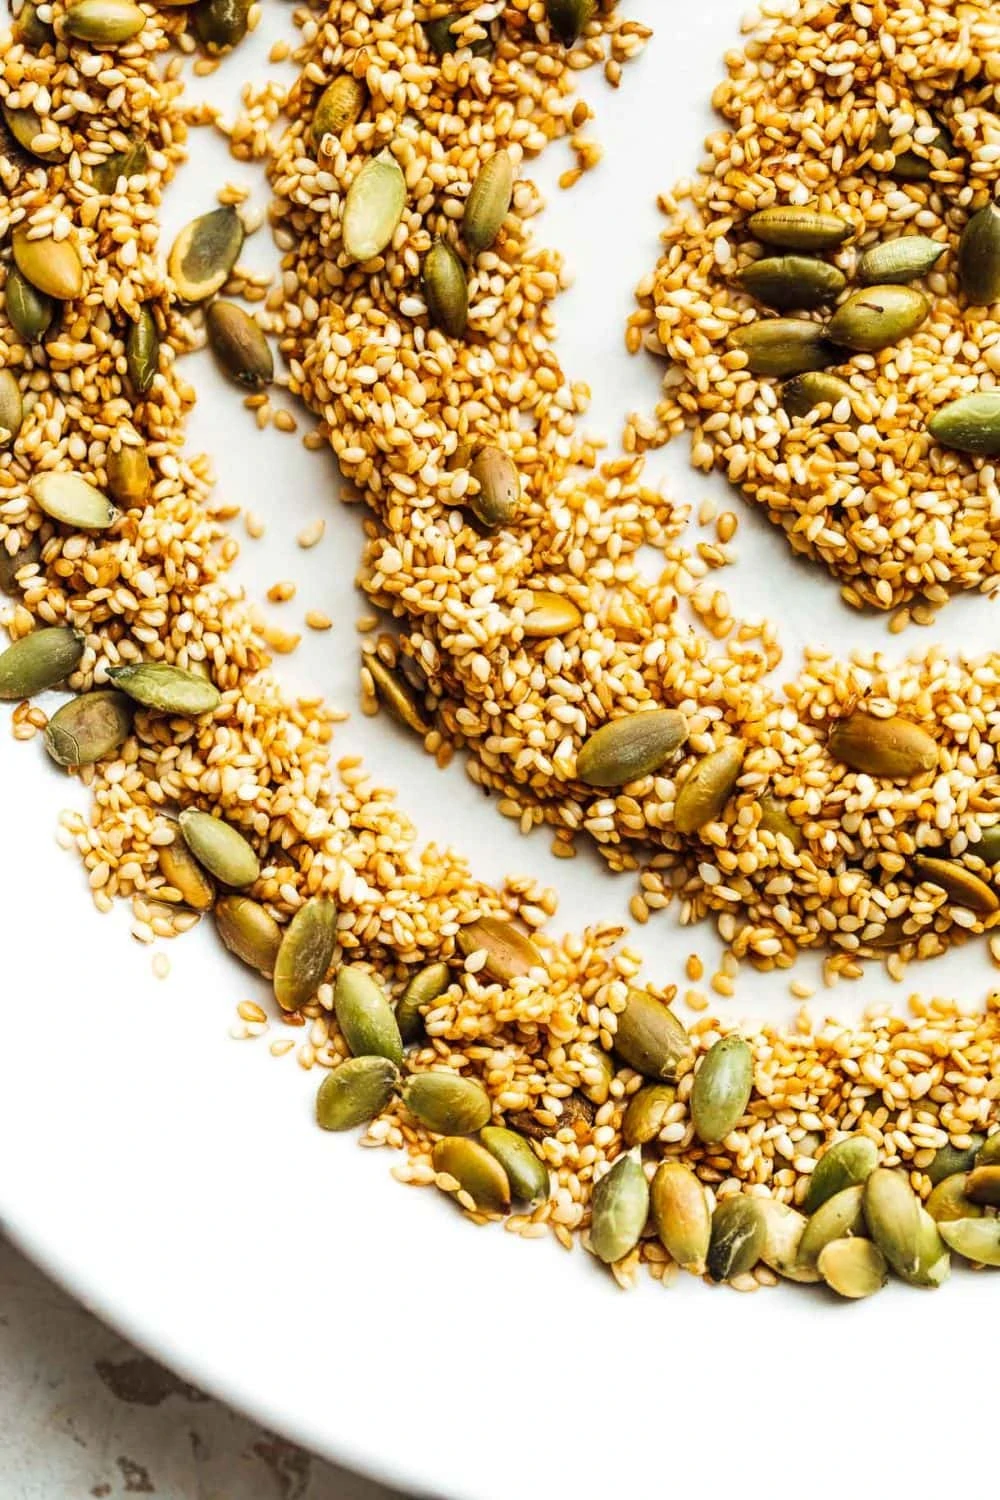 toasted sesame and pepita seeds in a swirled pattern on a white plate.